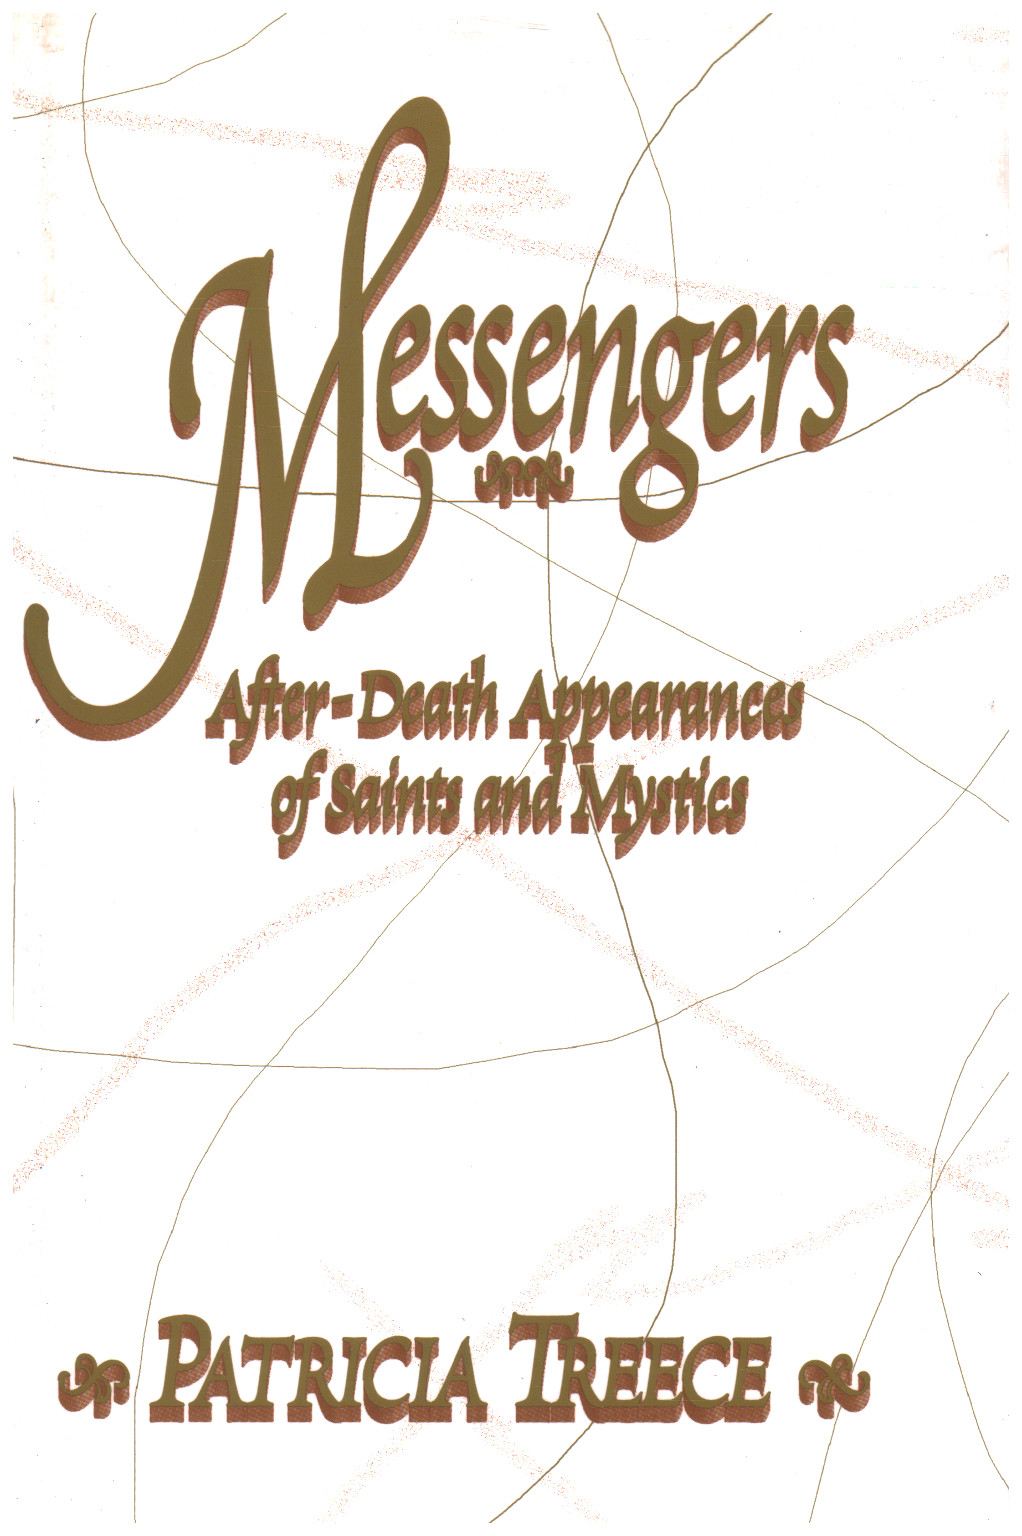 Messengers: After-Death Appearances of Saints and , s.a.